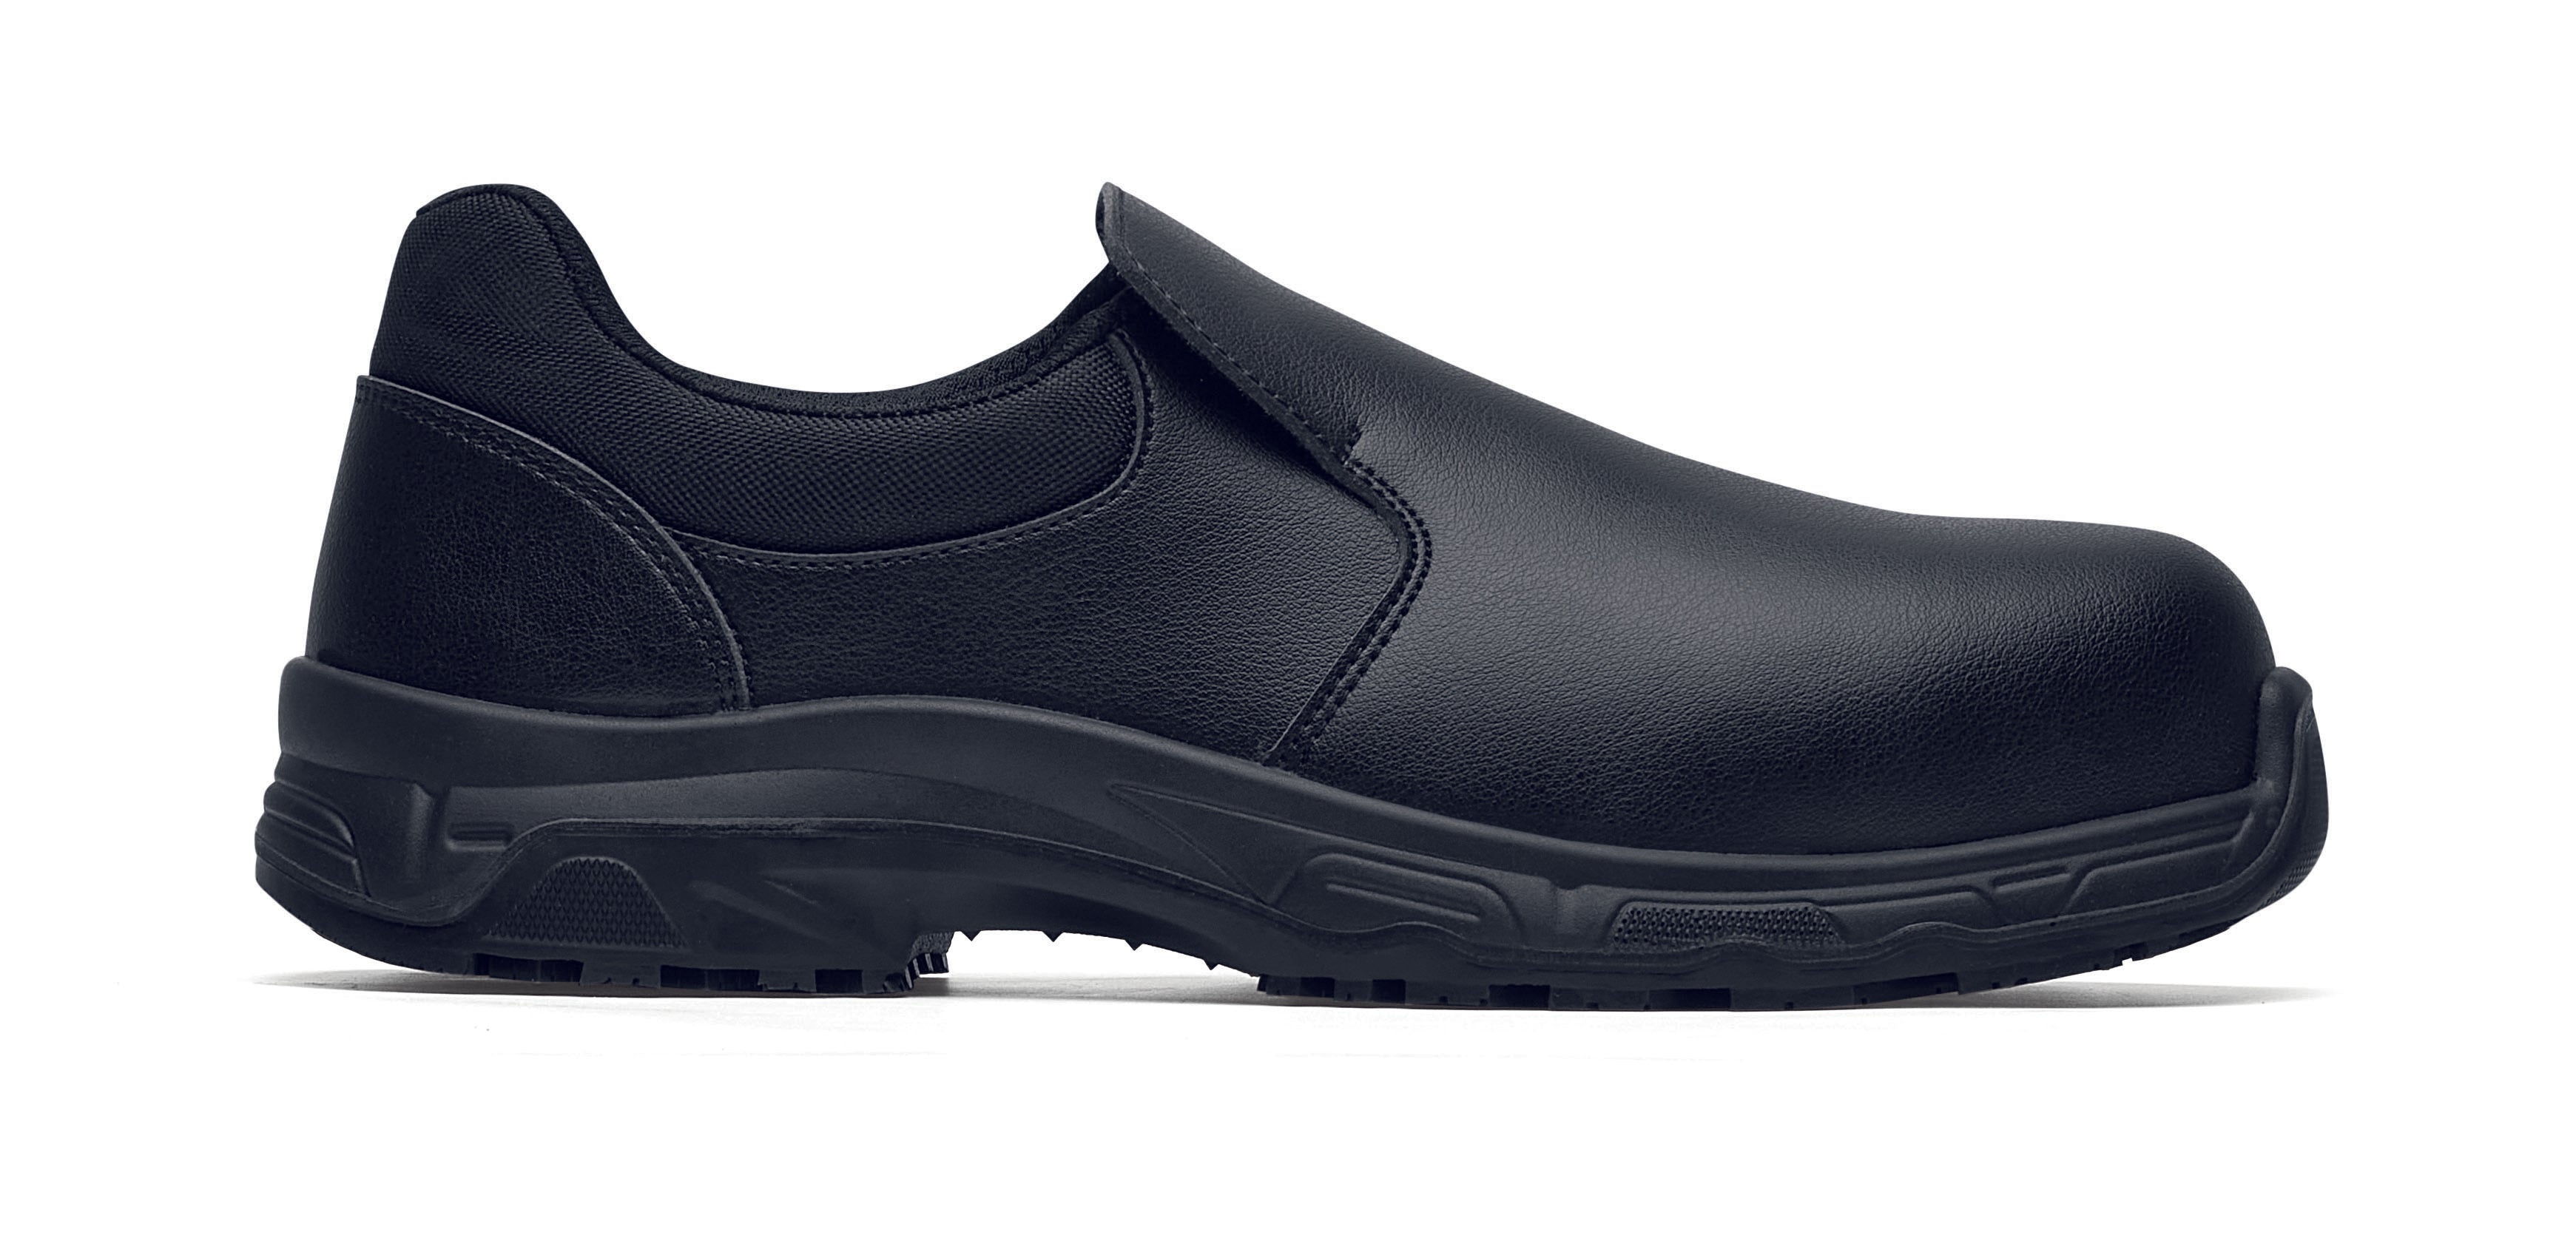 The Catania Black from Shoes For Crews, made in Italy, is a slip-resistant shoe with a composite safety toe cap and a puncture-resistant midsole, seen from the right.